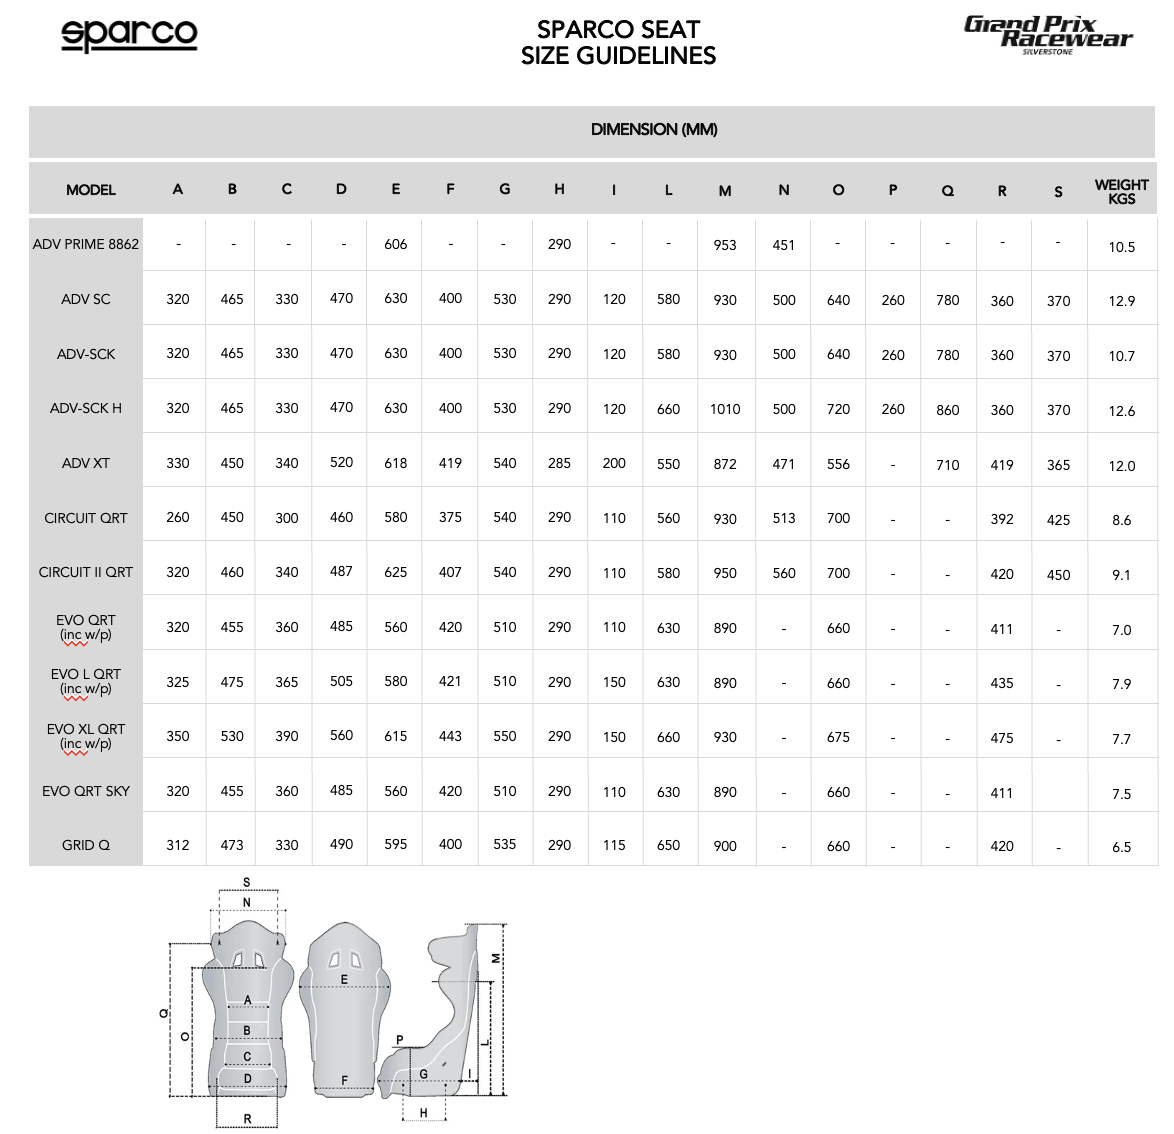 Size guide for Sparco Race Seats available from www.gprdirect.com